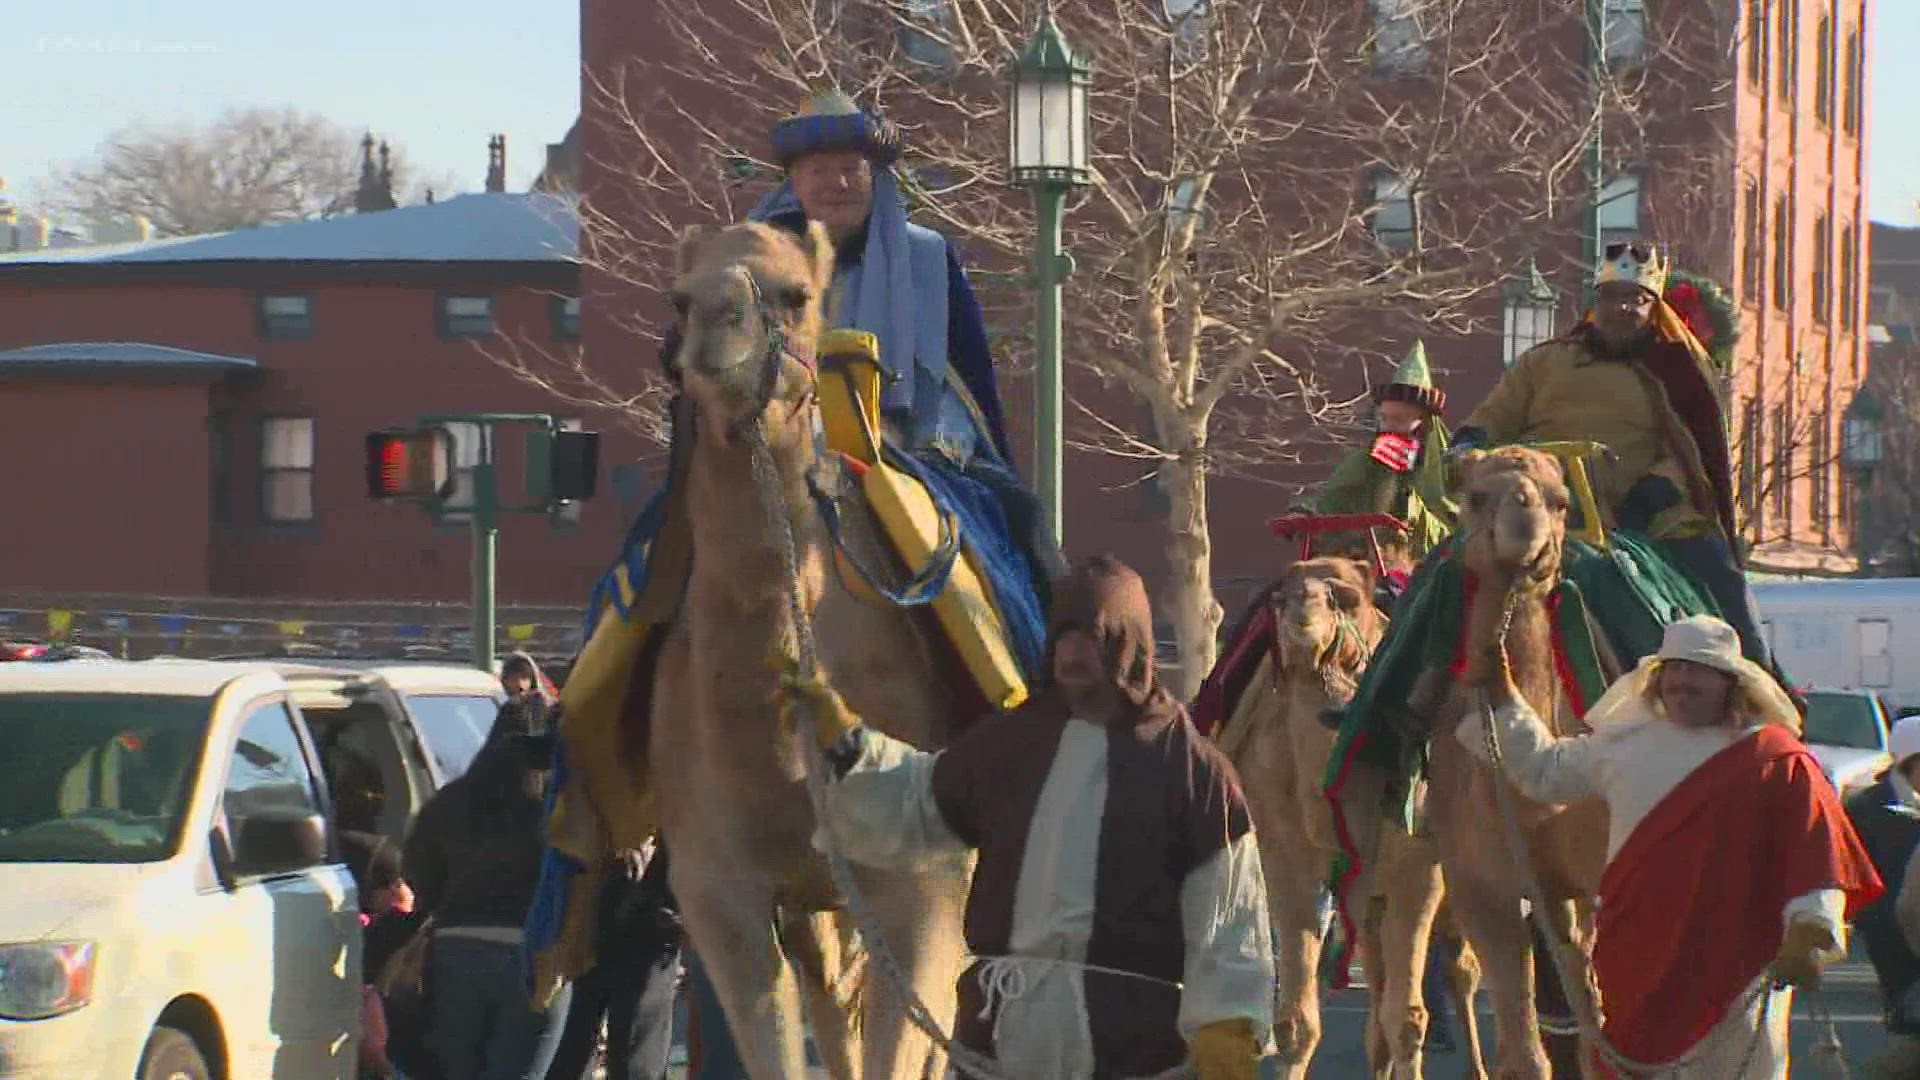 After having to press pause on a more than 20-year tradition last year because of the pandemic, organizers of Hartford's Three Kings Day parade and festivities made